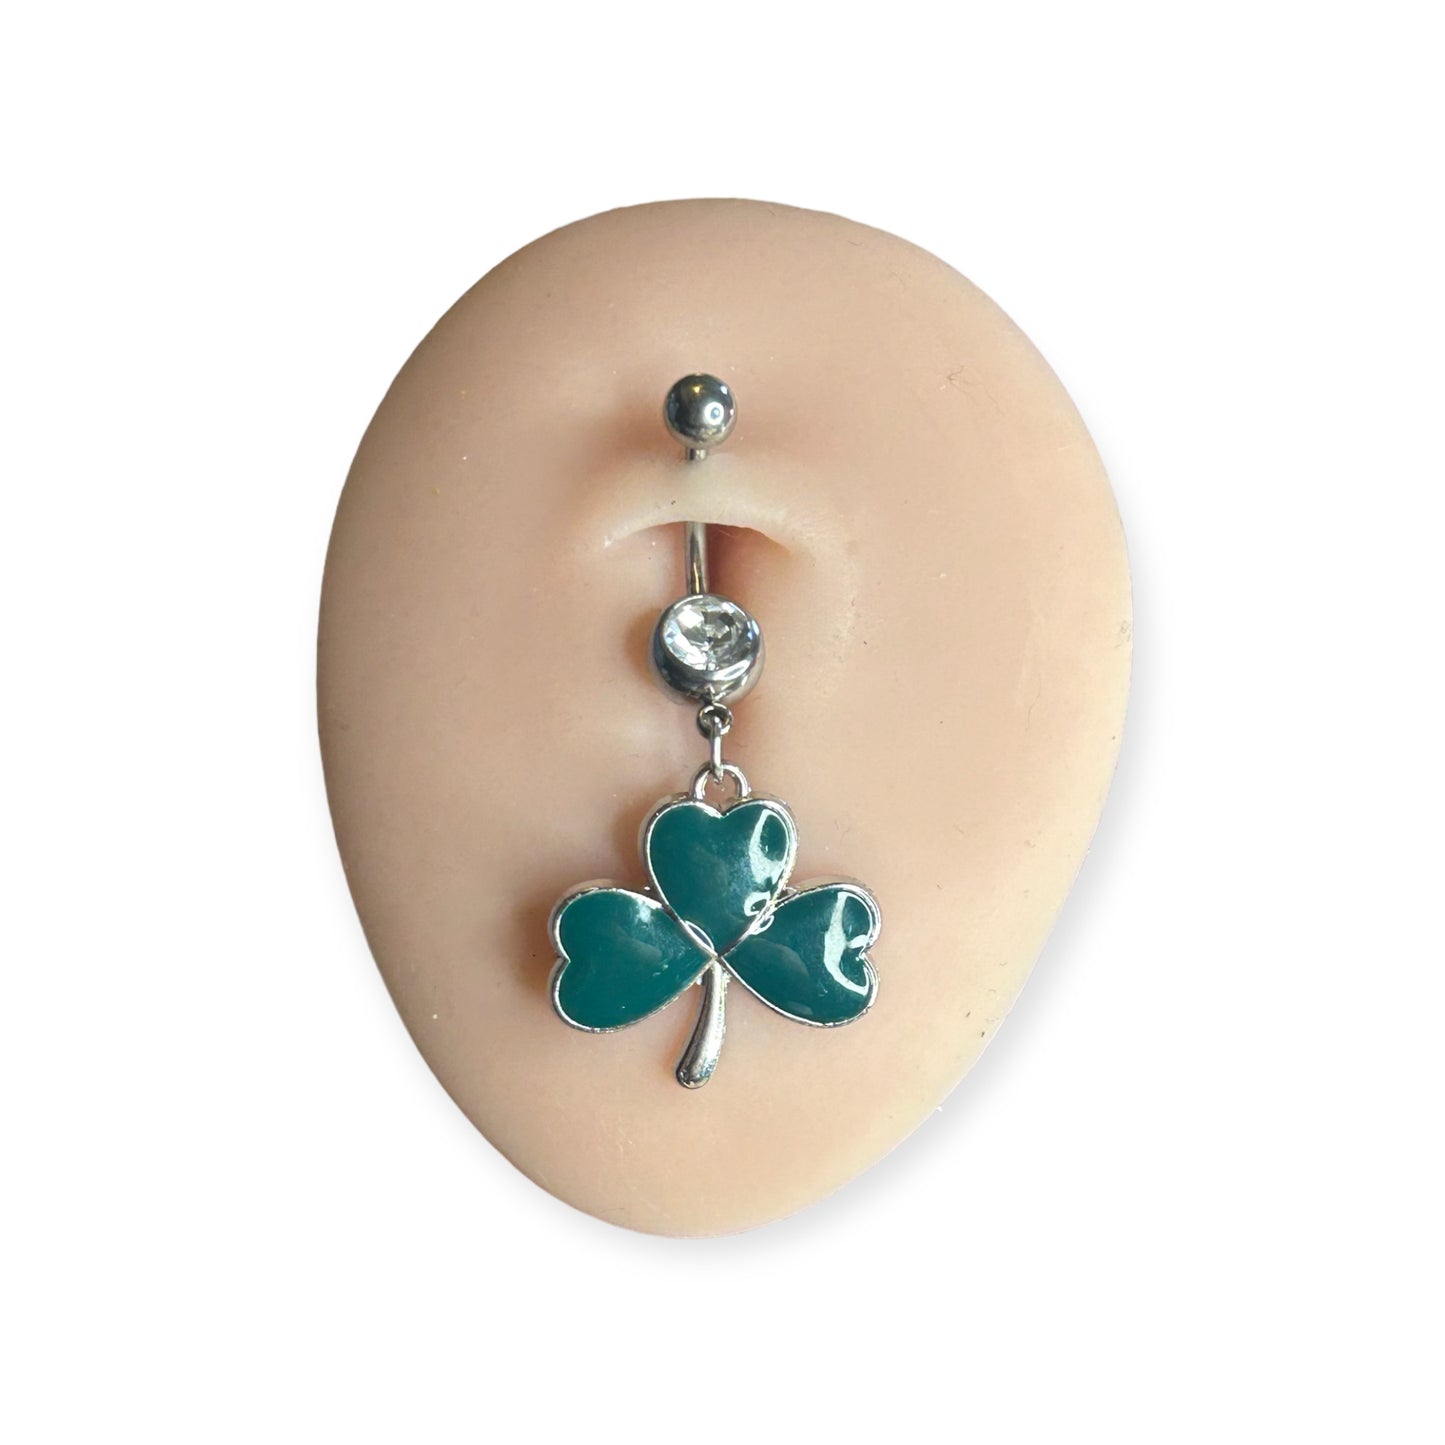 Clover belly ring